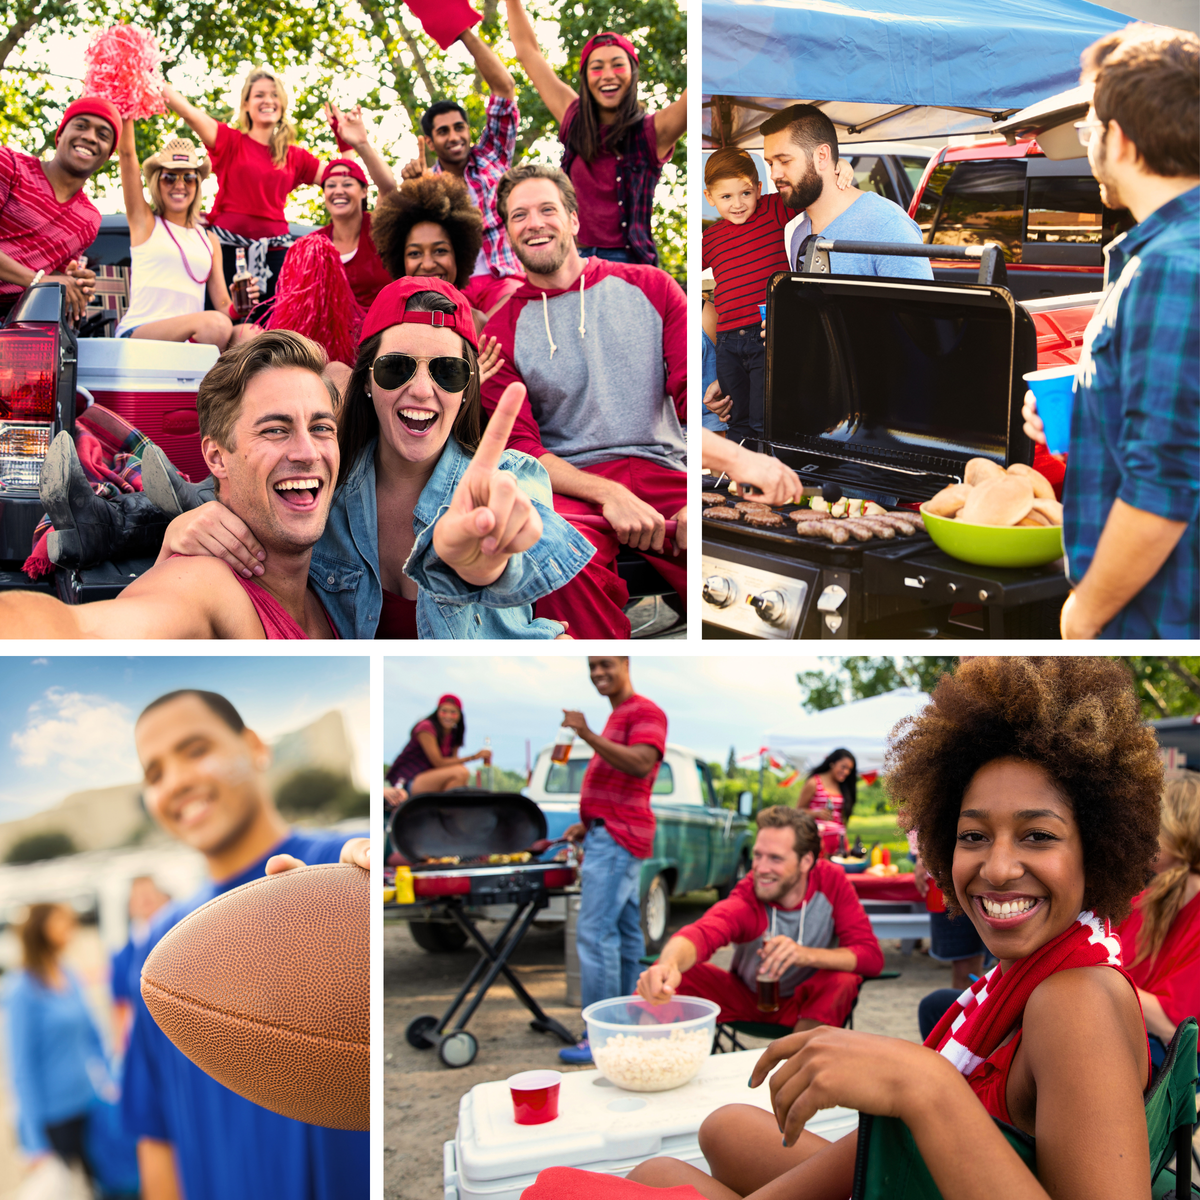 Four scenes of friends and fans partying at tailgate in parking lot.